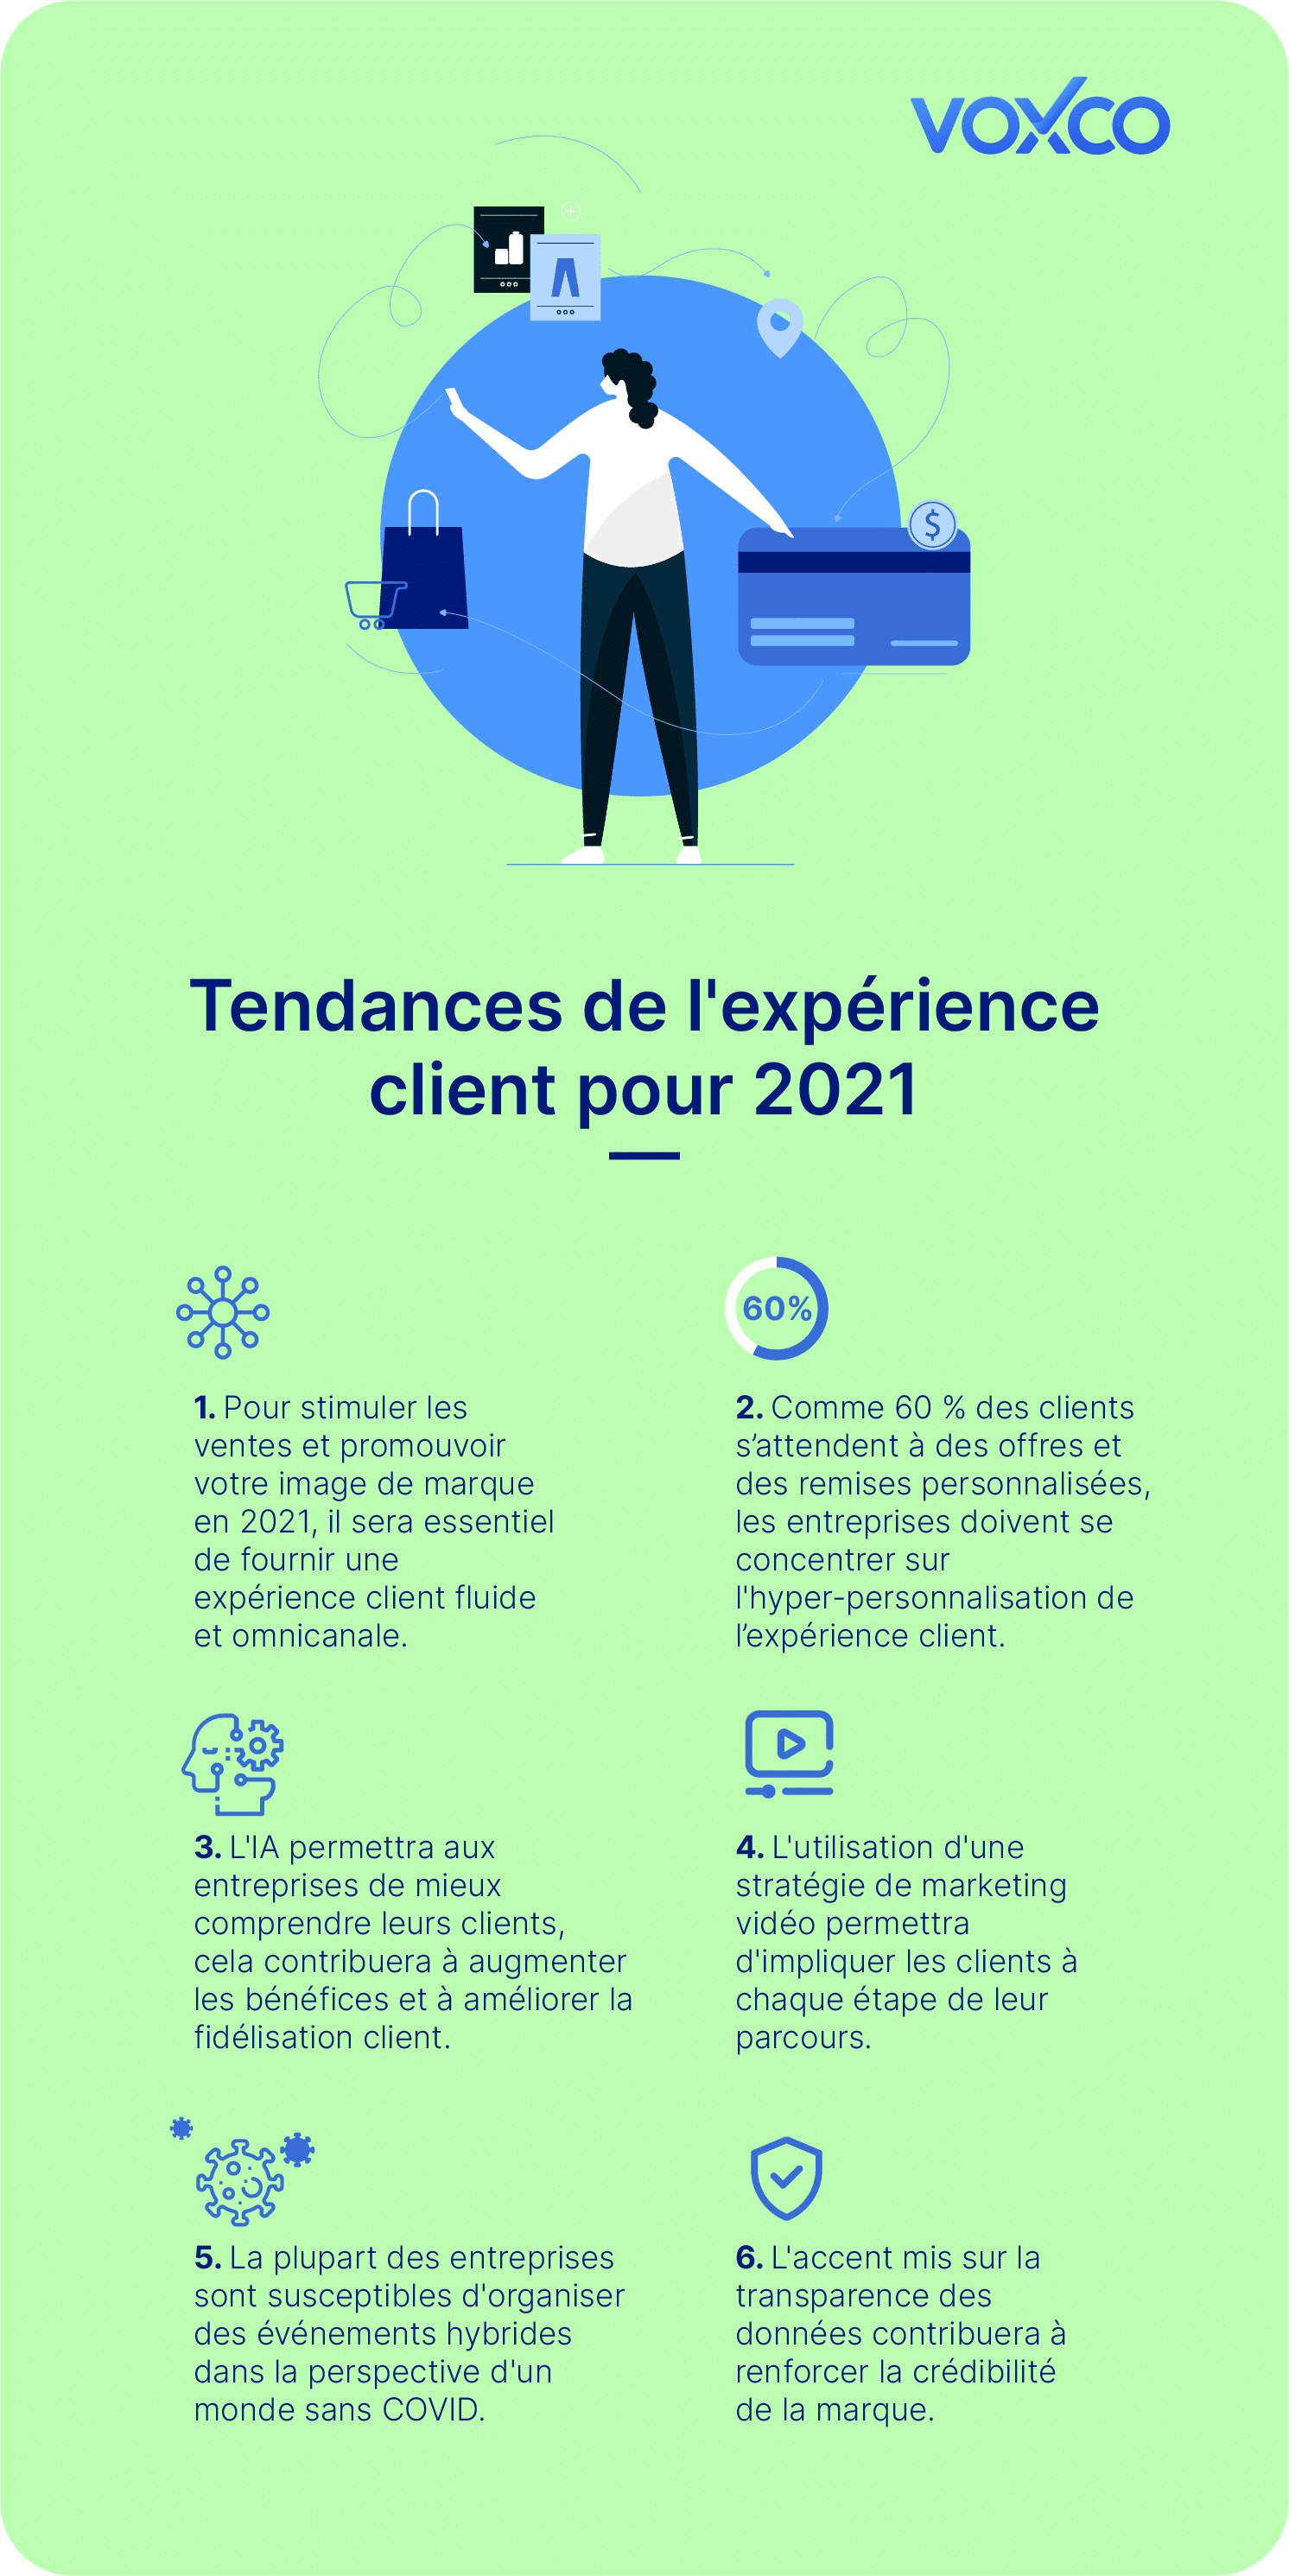 Customer Experience Trends to Watch out For in 2021 French 06